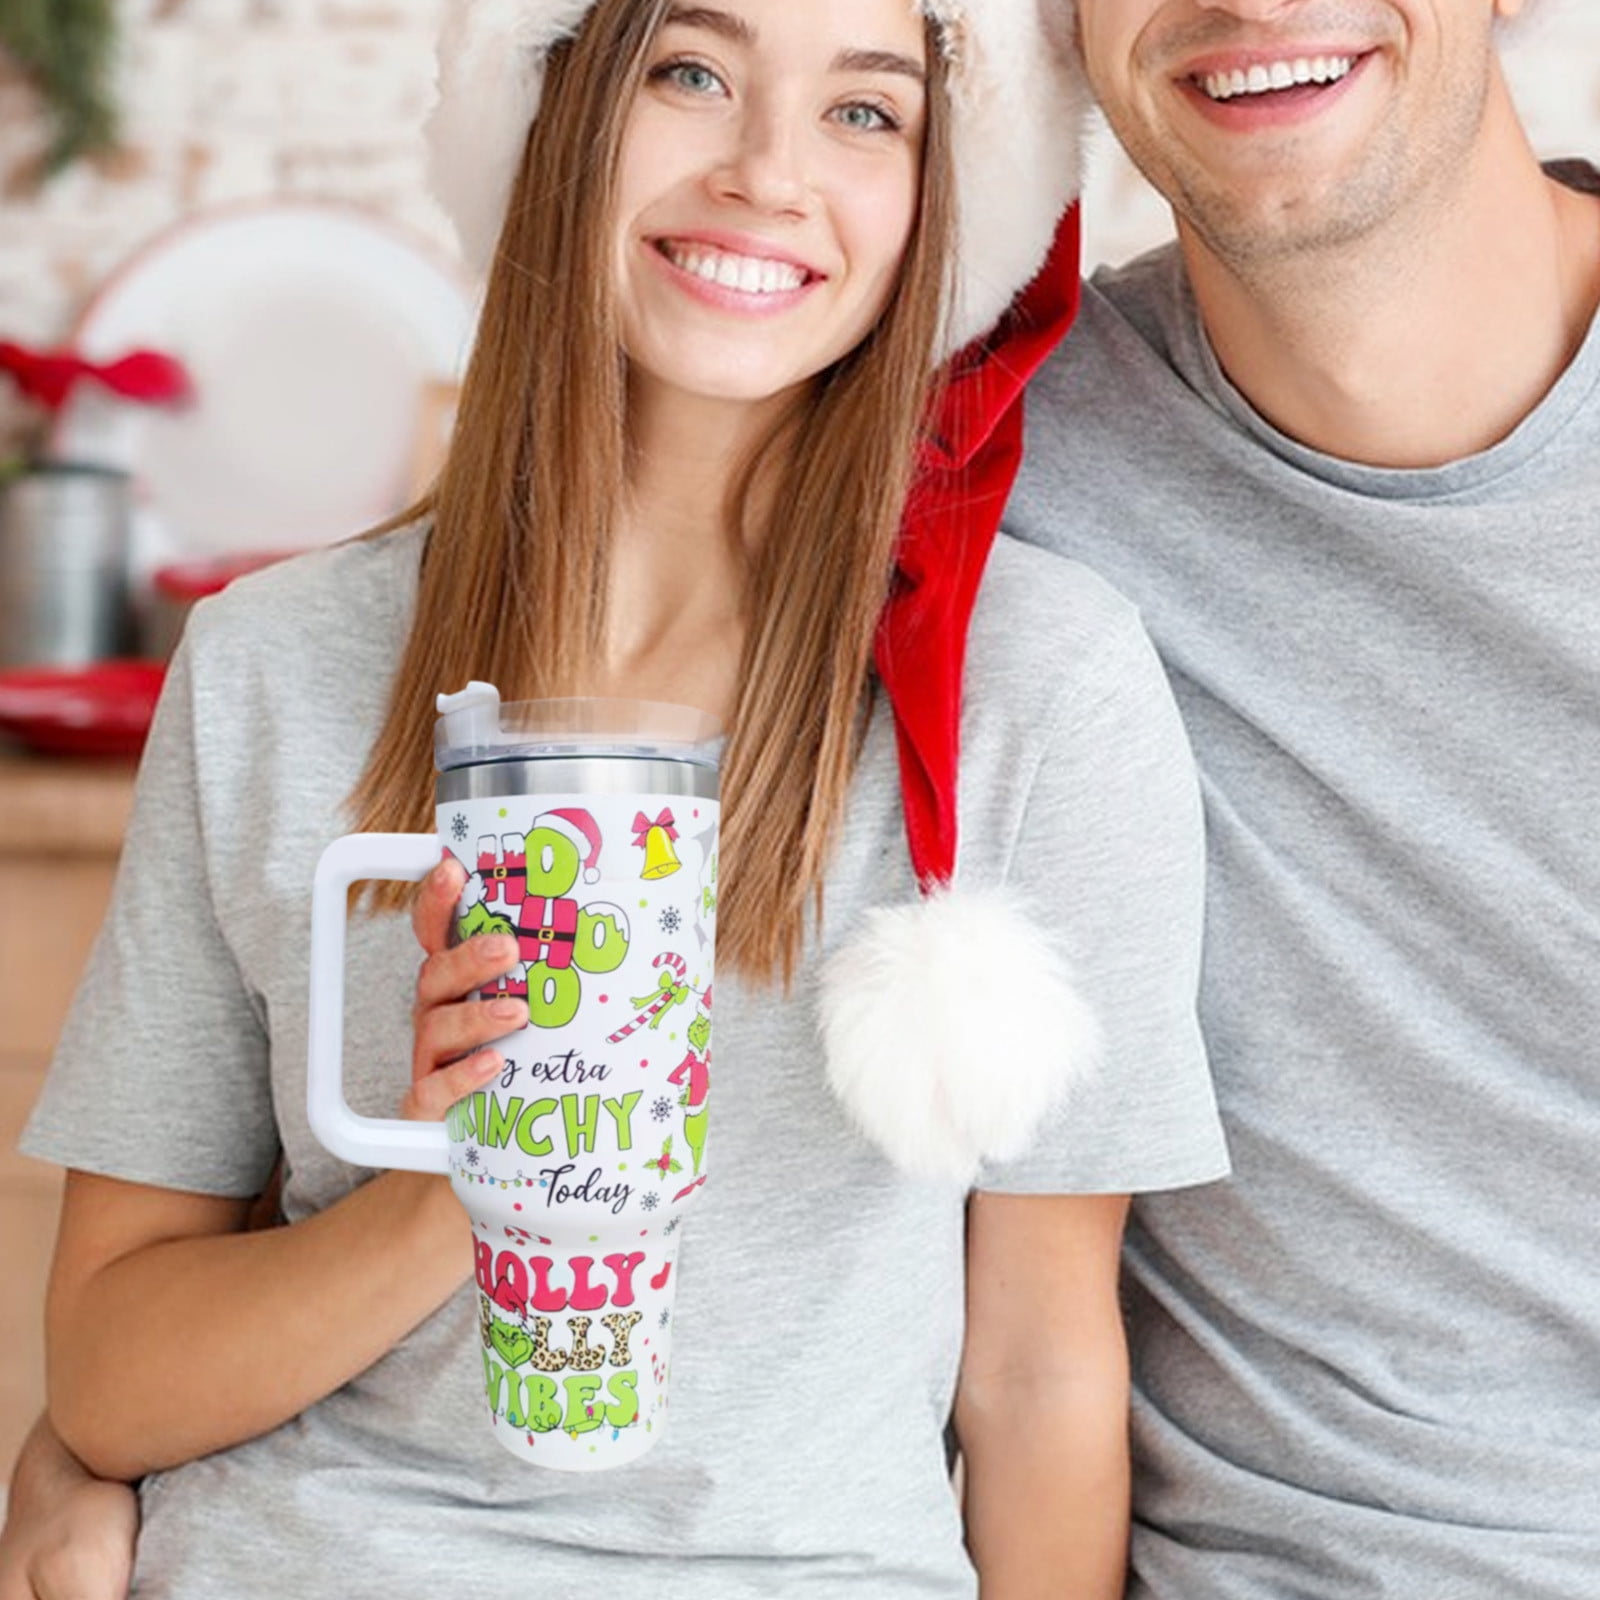 40oz Grinch Tumblers with Handle Stainless Steel Travel Mug